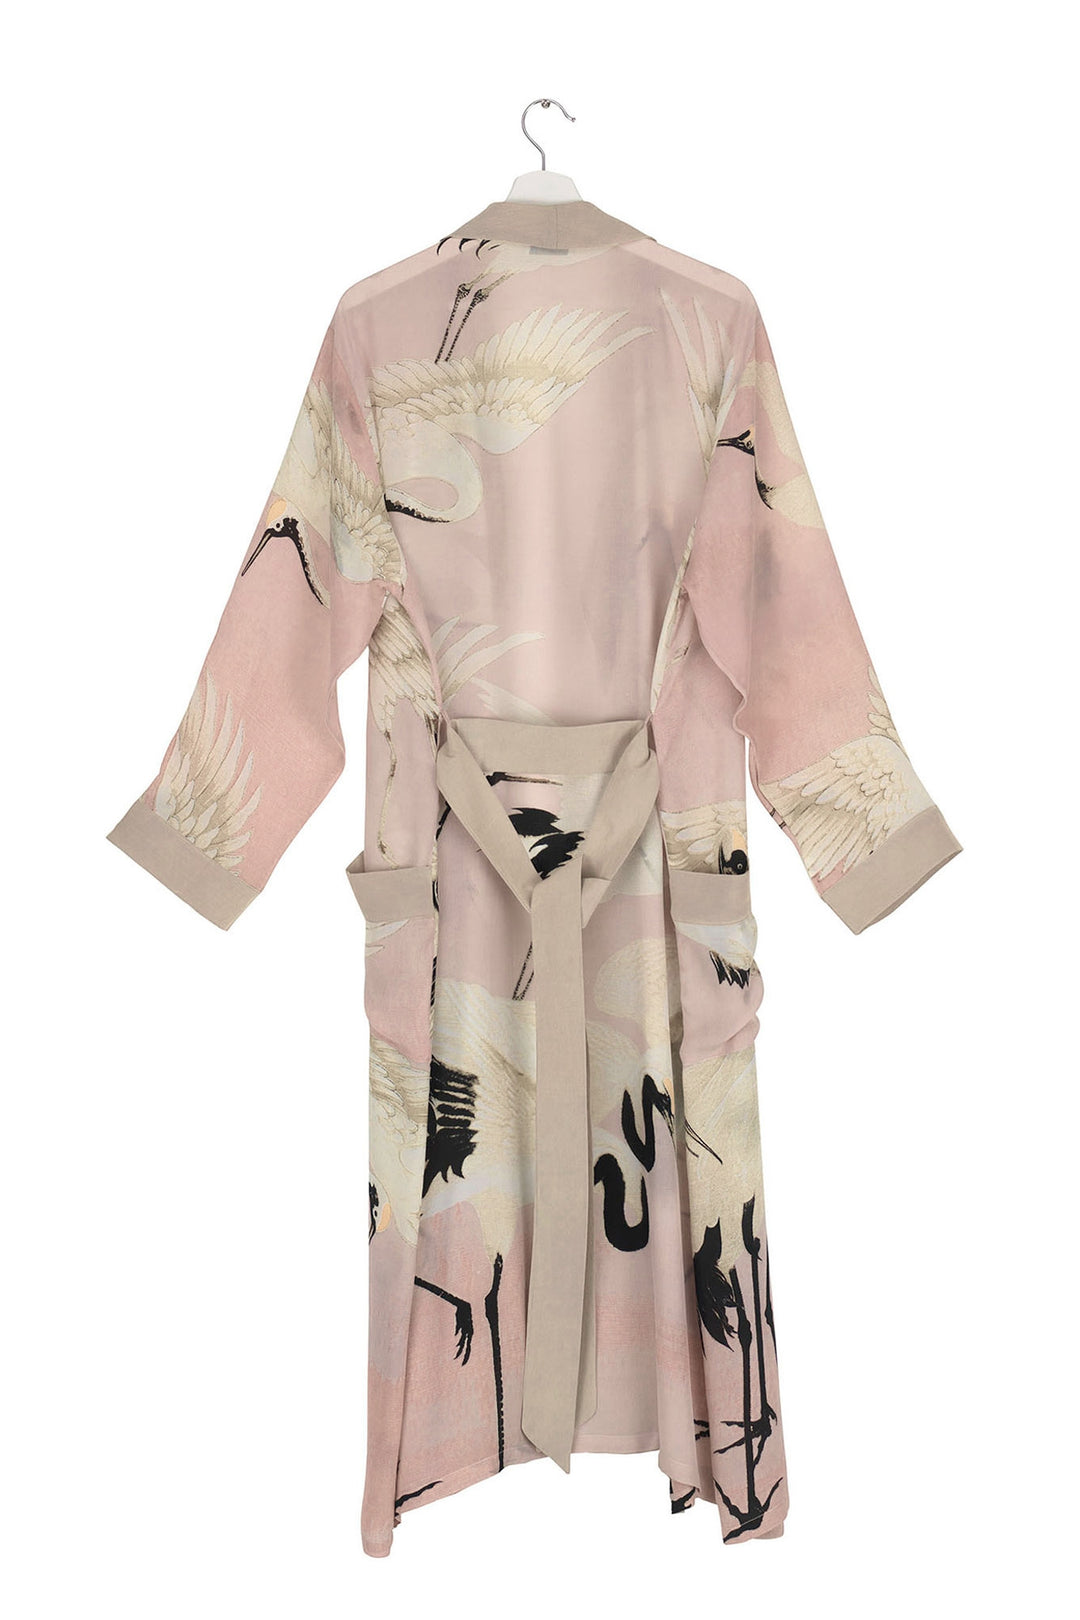 womens dressing gown in stork pink design by one hundred stars